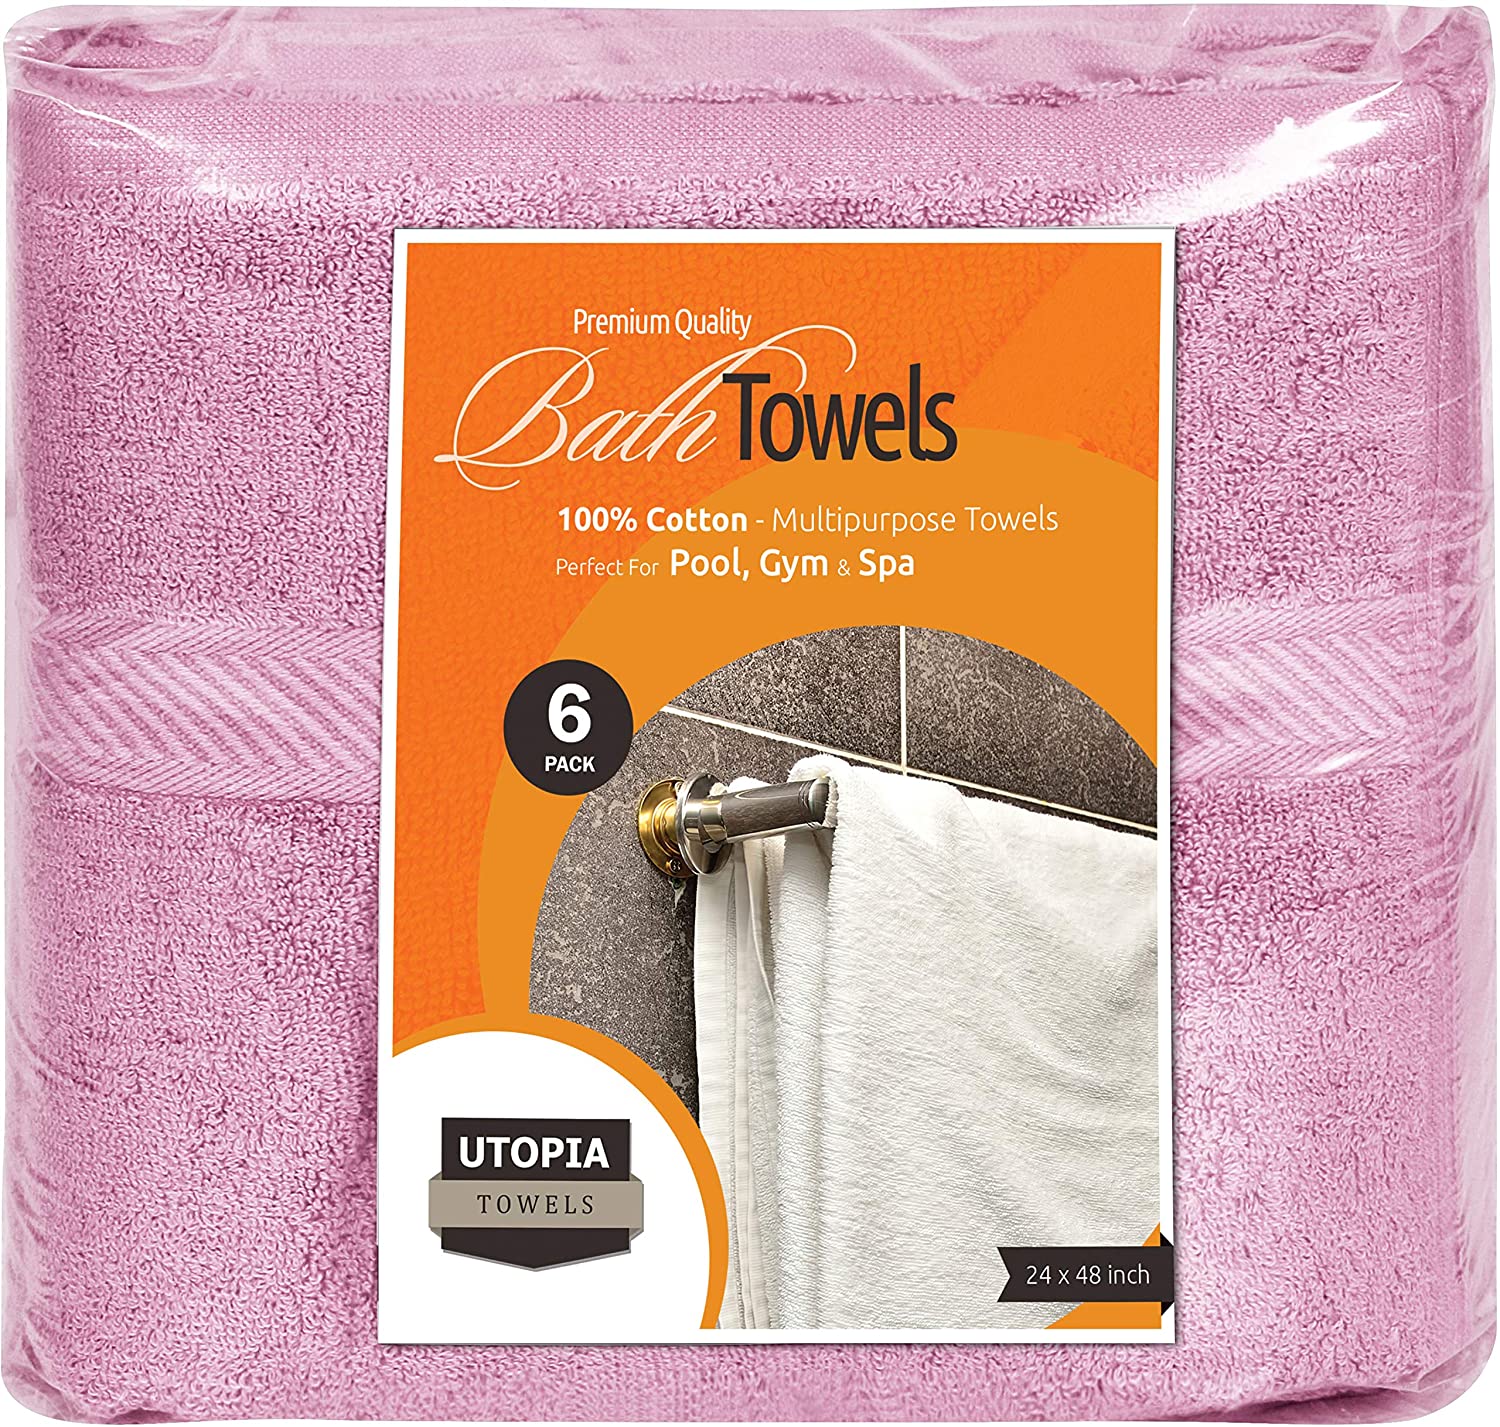 Utopia Towels Have Excellent Quality, According to Shoppers